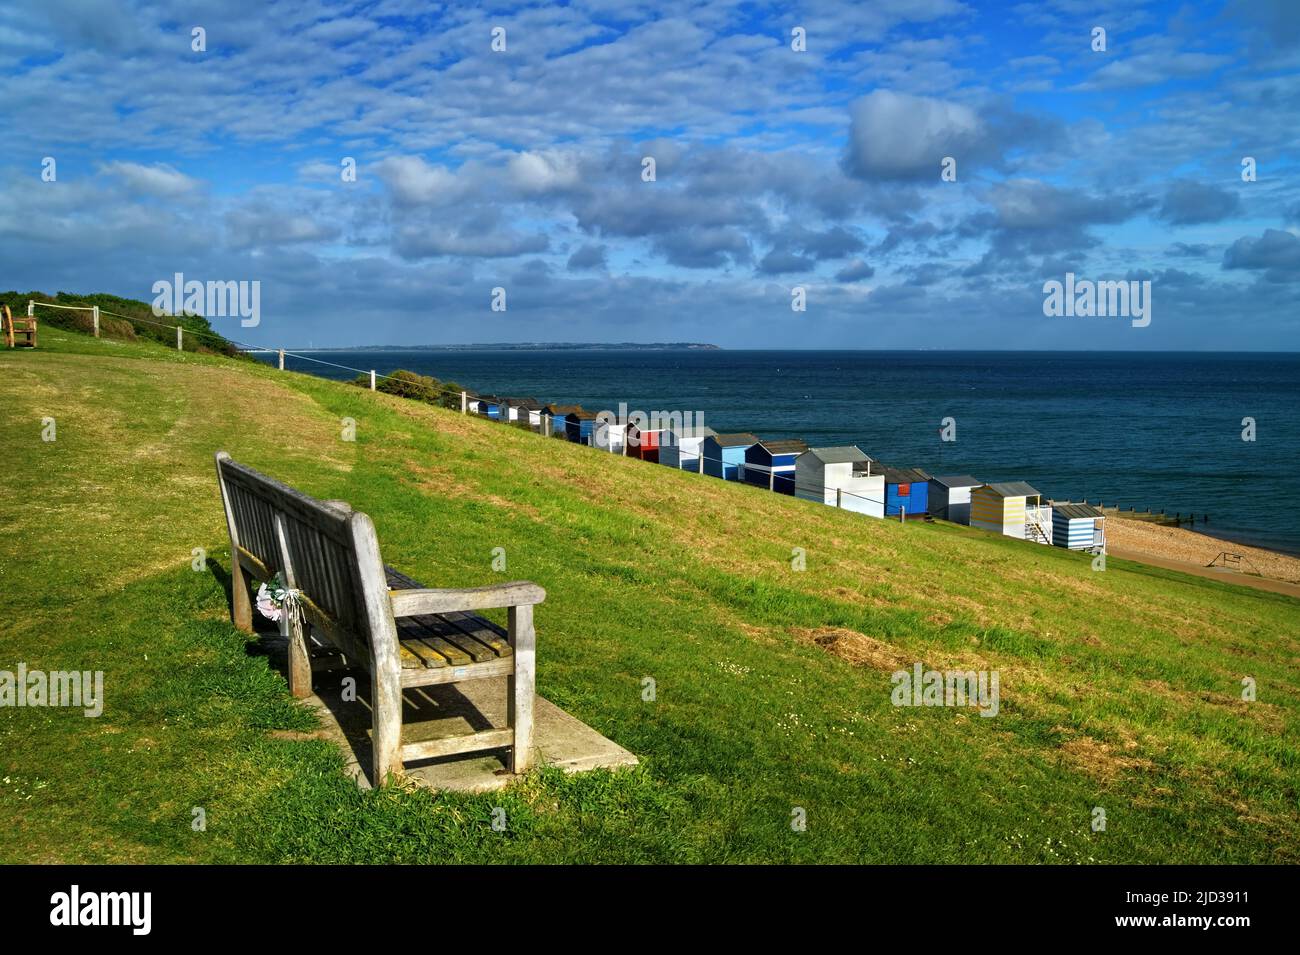 UK, Kent, Tankerton Slopes view overlooking Beach and Sea Stock Photo